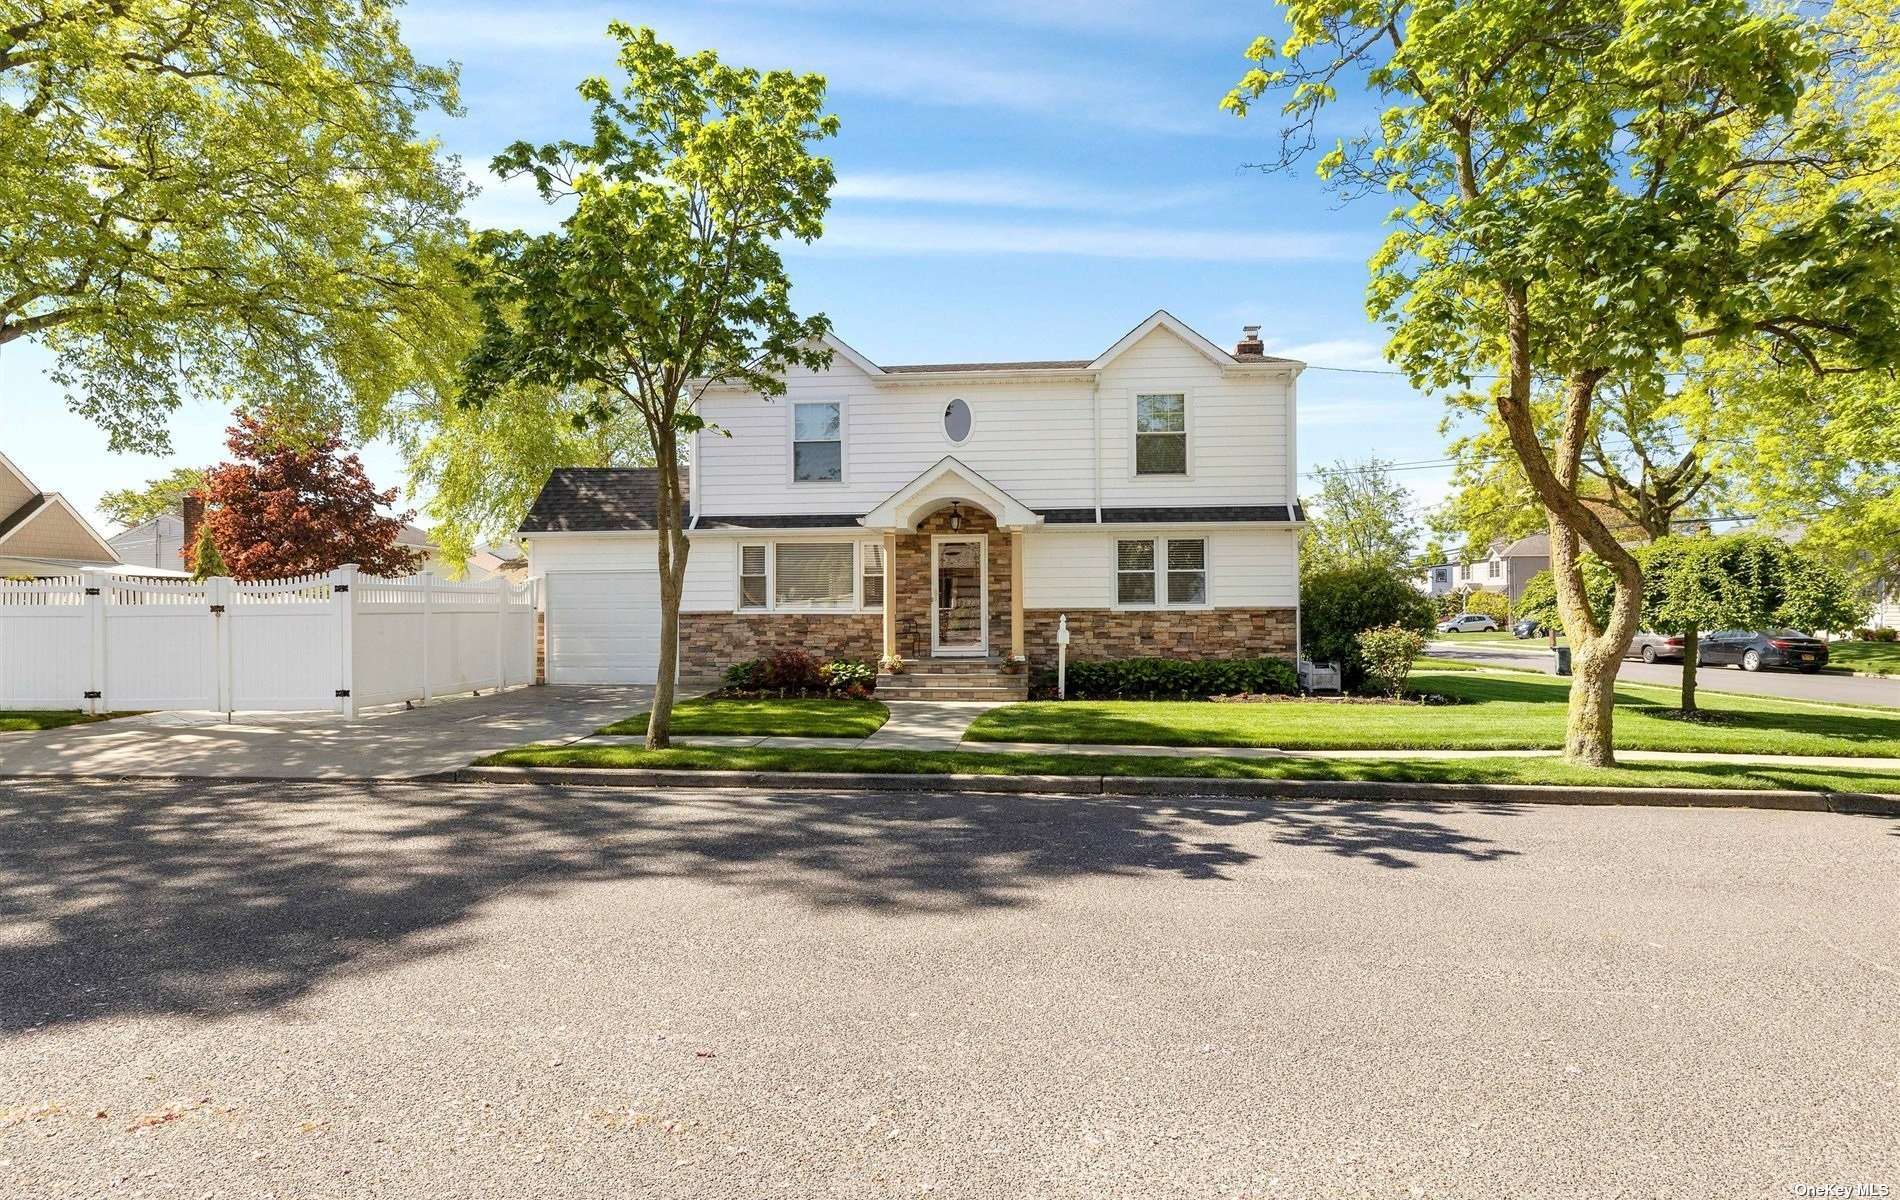 Listing in Wantagh, NY